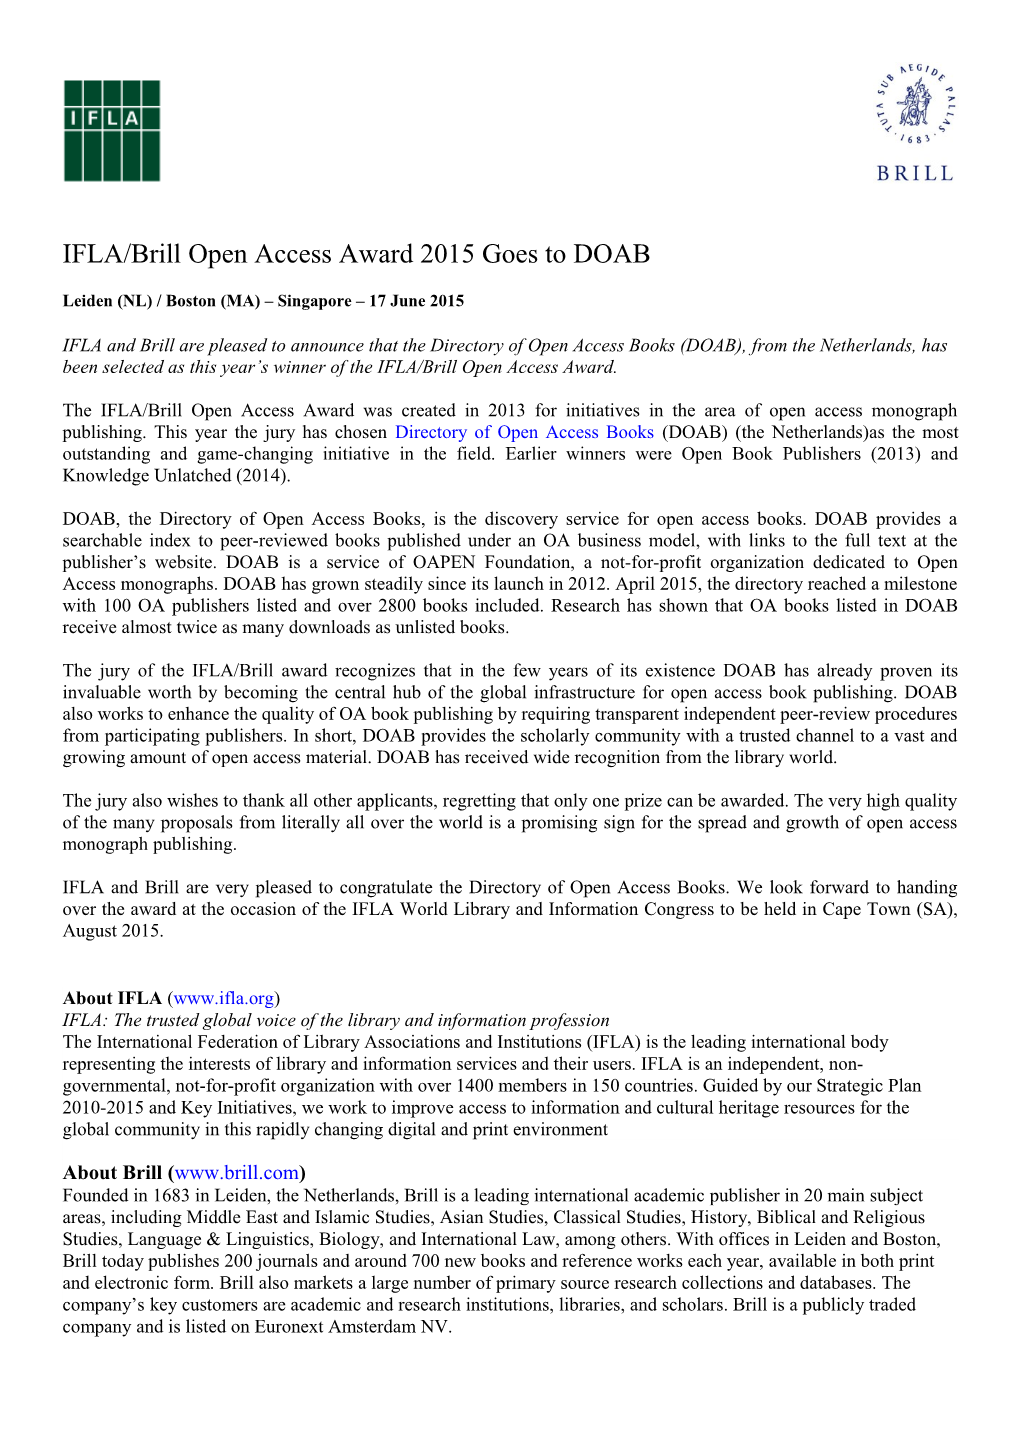 IFLA/Brill Open Access Award 2015 Goes to DOAB